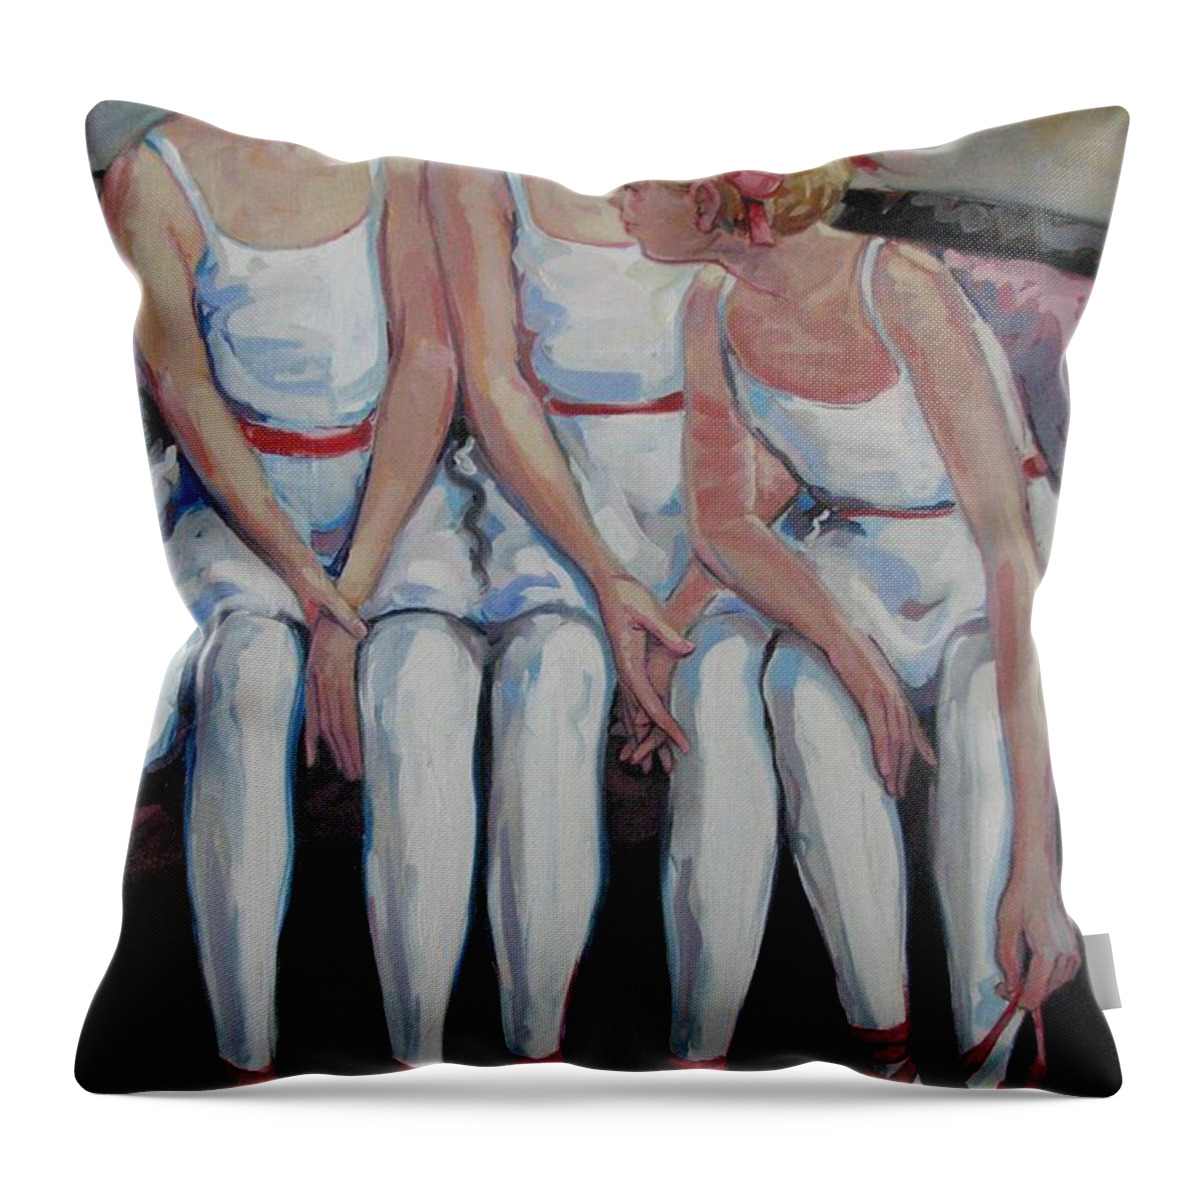 Portrait Of Three Ballerinas Telling Secrets Throw Pillow featuring the painting Secrets by Jerrold Carton